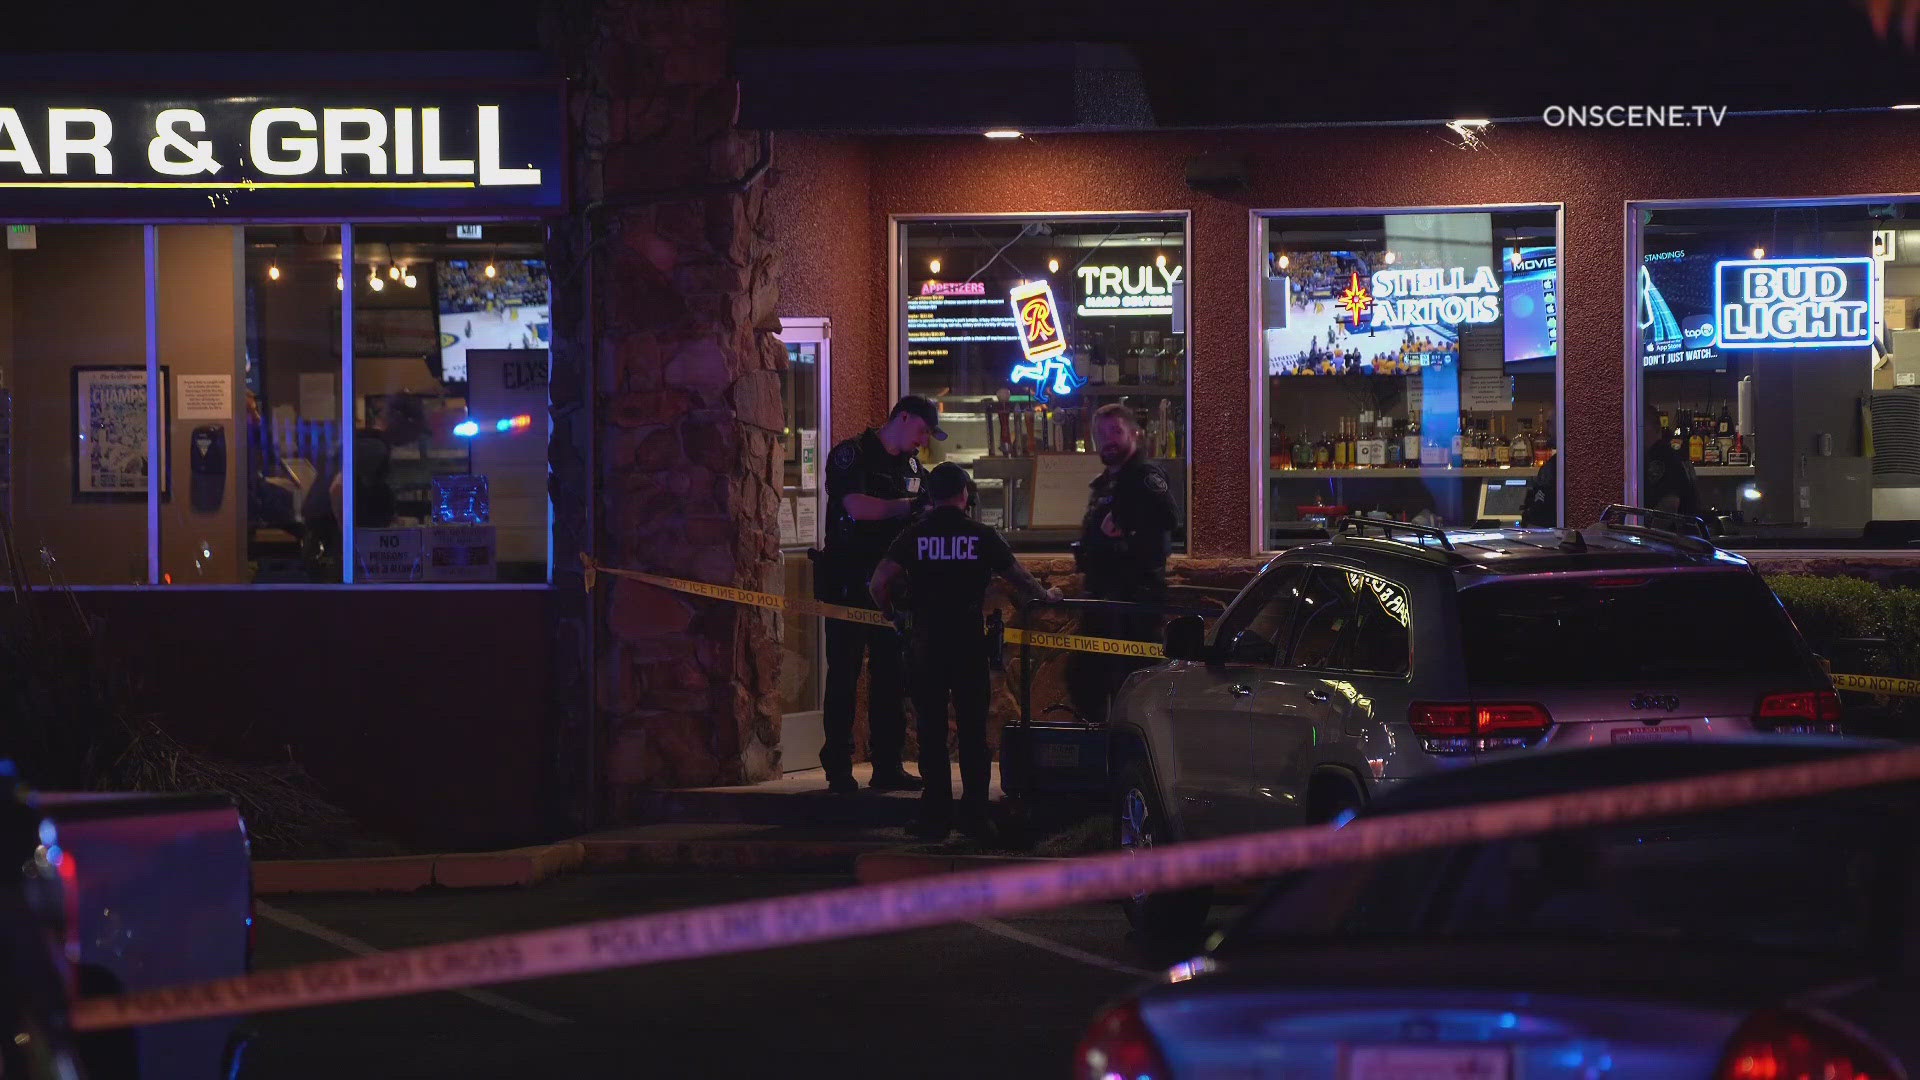 A fight in the parking lot of the Meeker St. Bar and Grill resulted in a shooting inside the restaurant